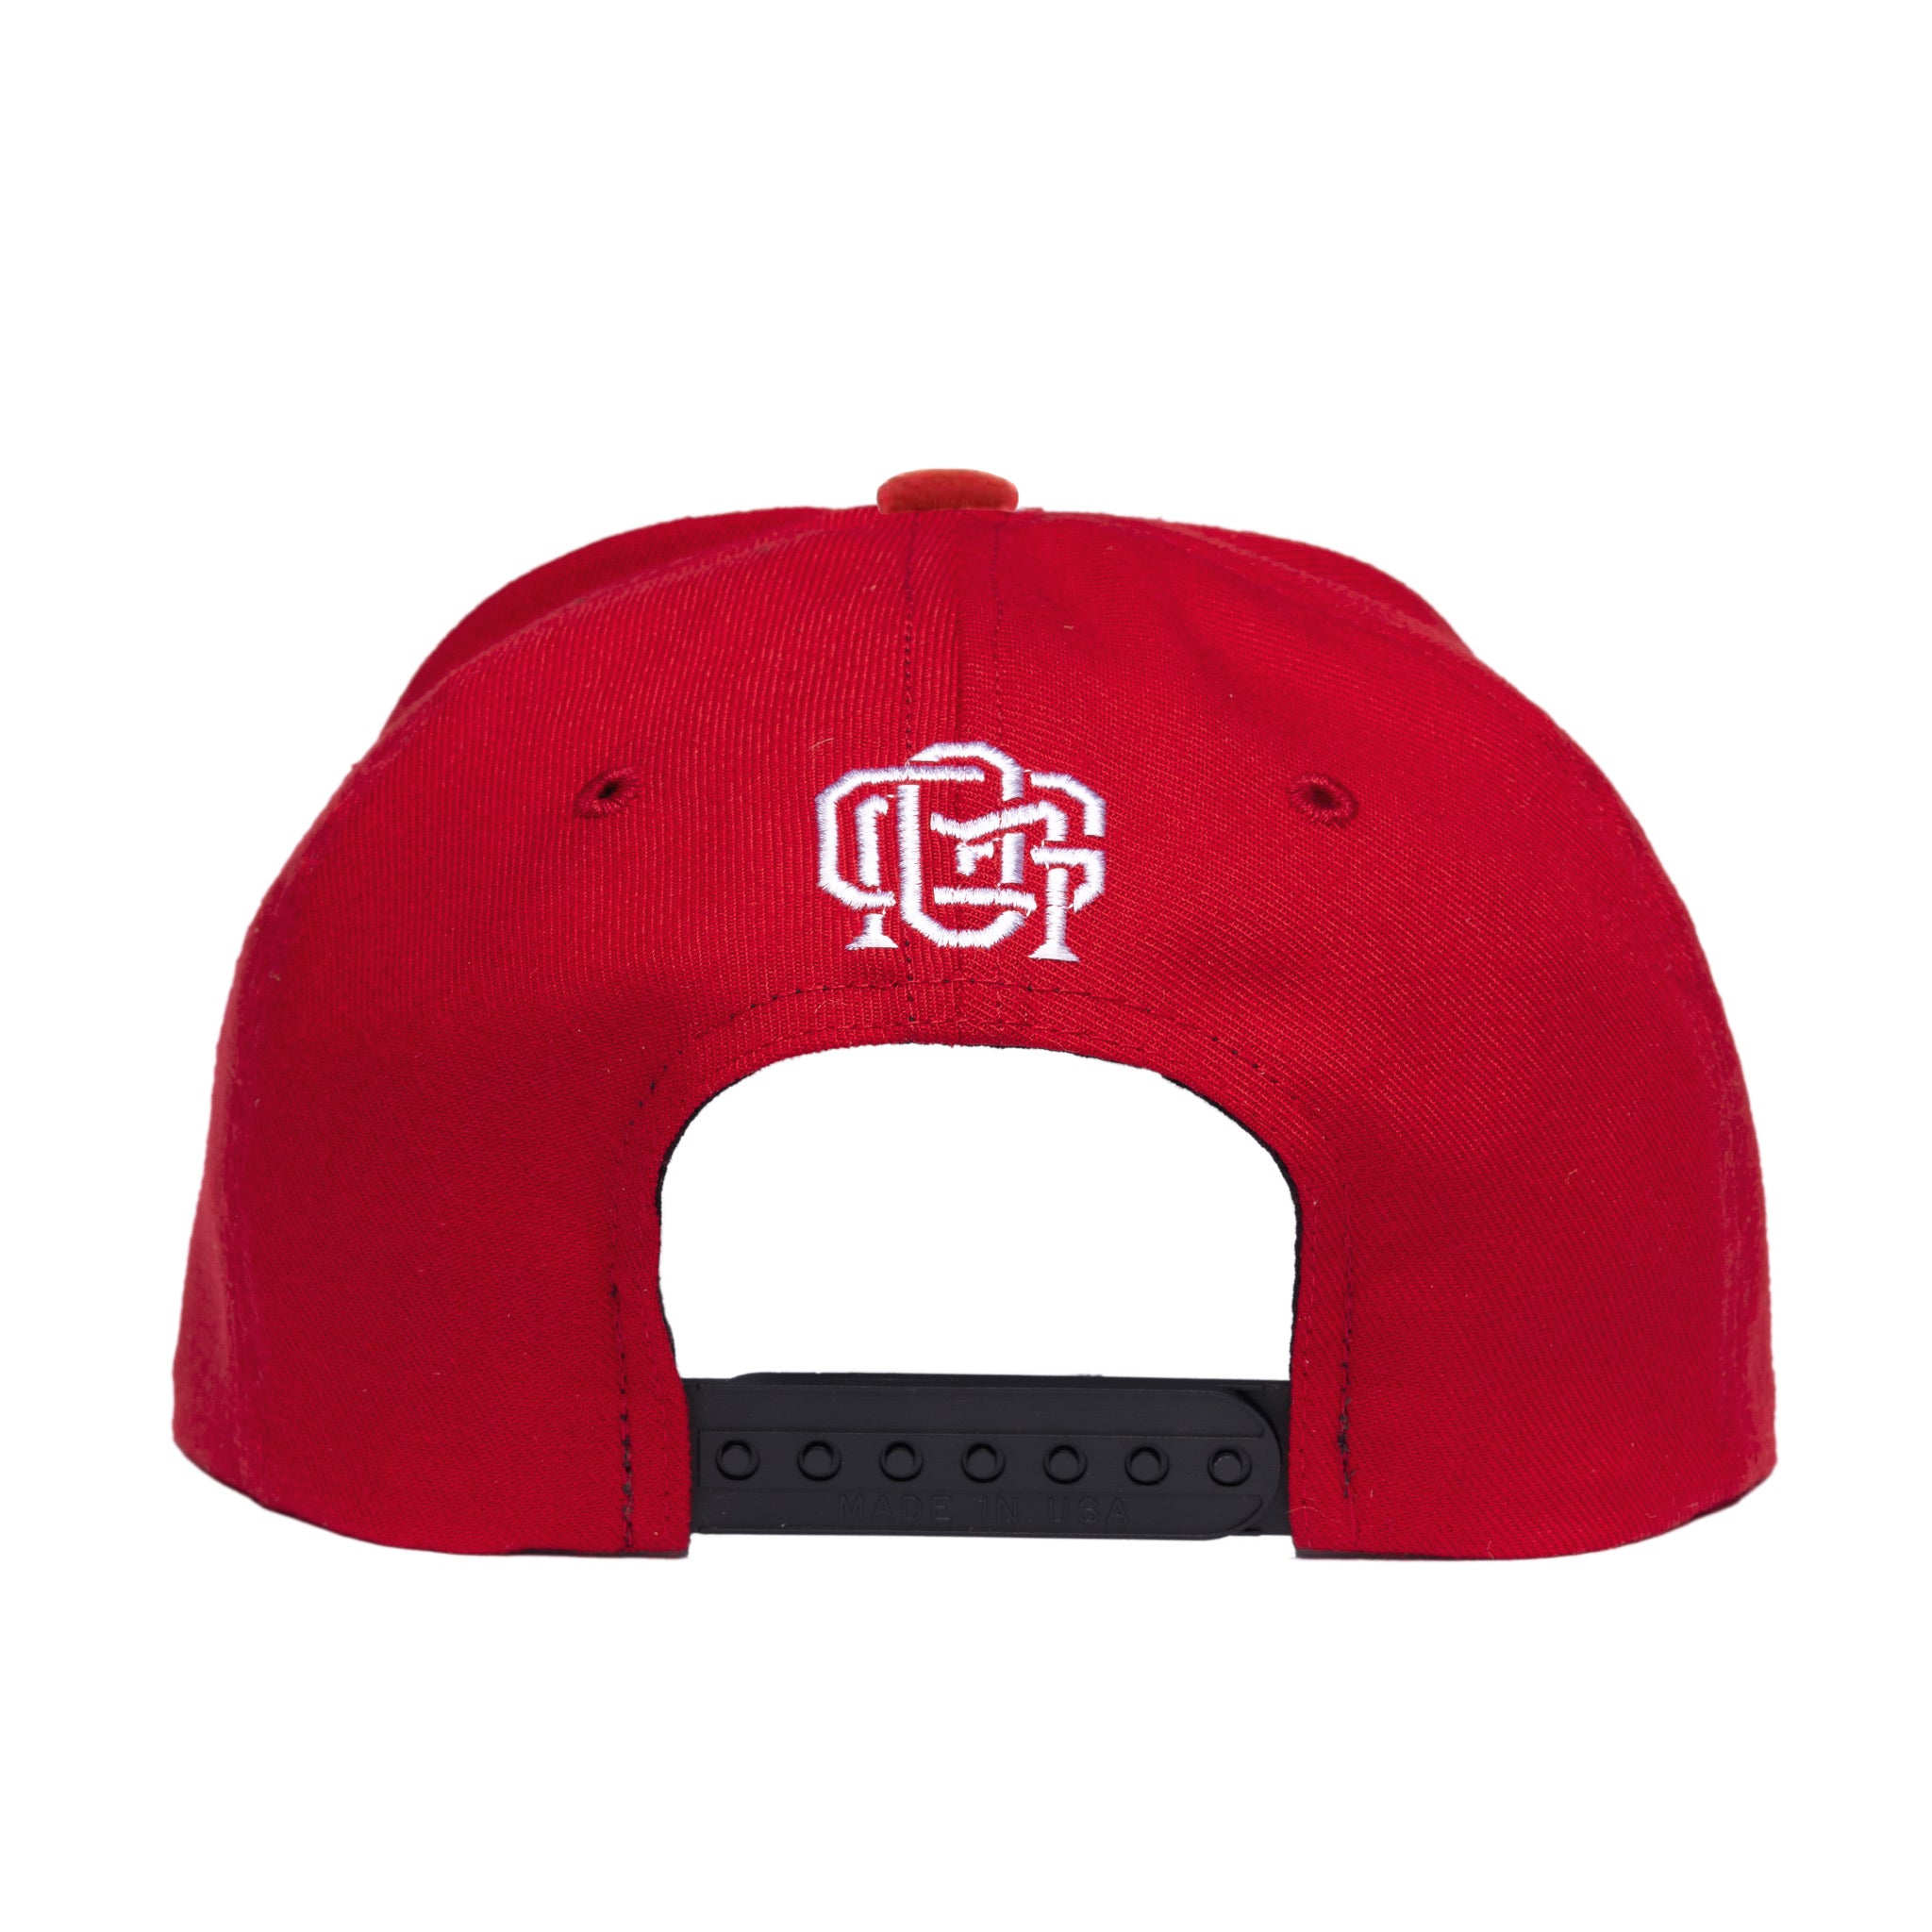 GOM Classic Snapback, Red/White